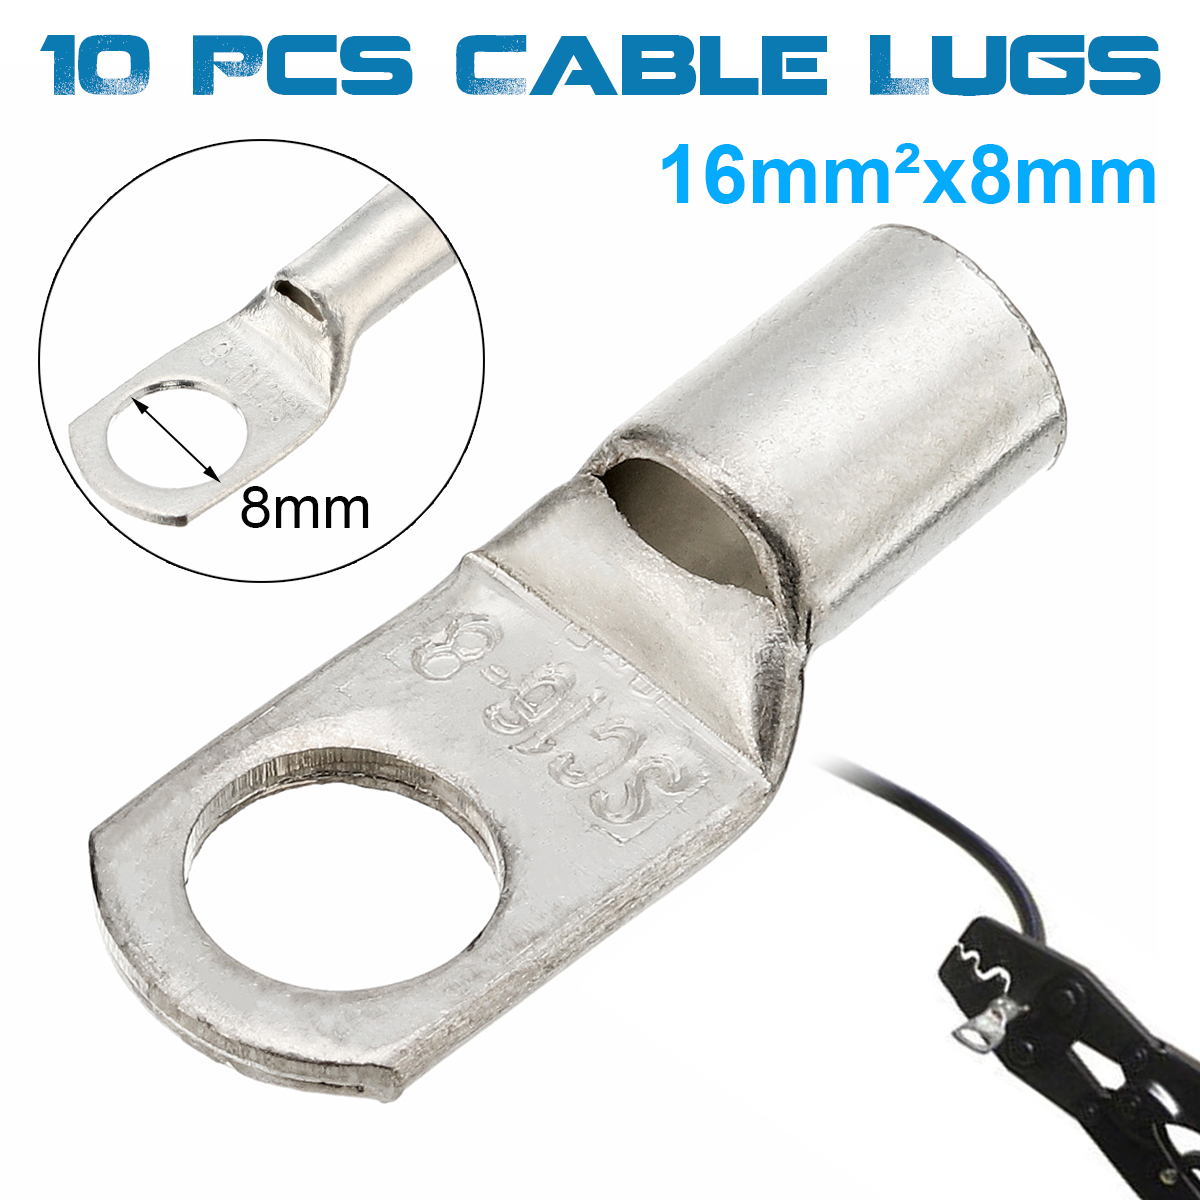 10Pcs Cable Lugs Set Terminal Silver Copper Electrical Block Wire 8mm Connectors Terminals for Battery Wire Auto Marine RV 4WD